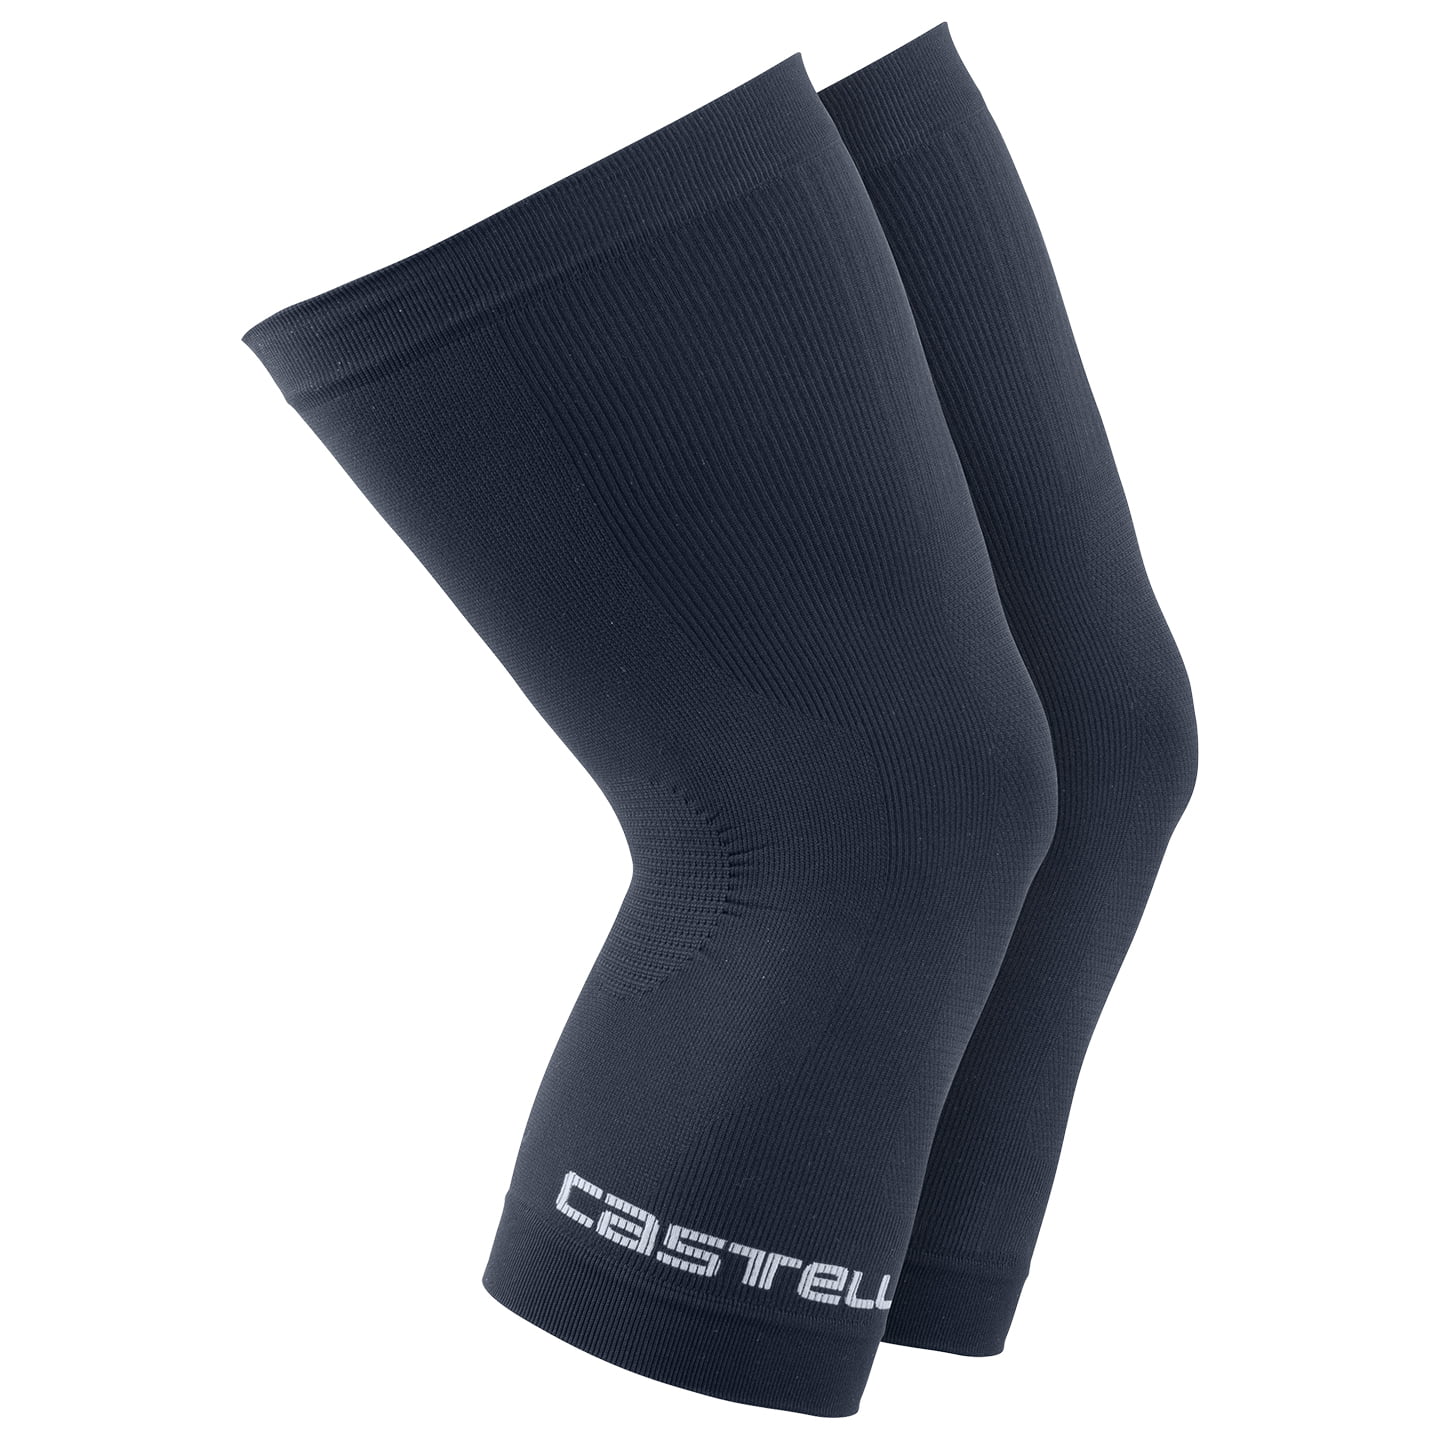 CASTELLI Pro Seamless Knee Warmers Knee Warmers, for men, size L-XL, Cycling clothing